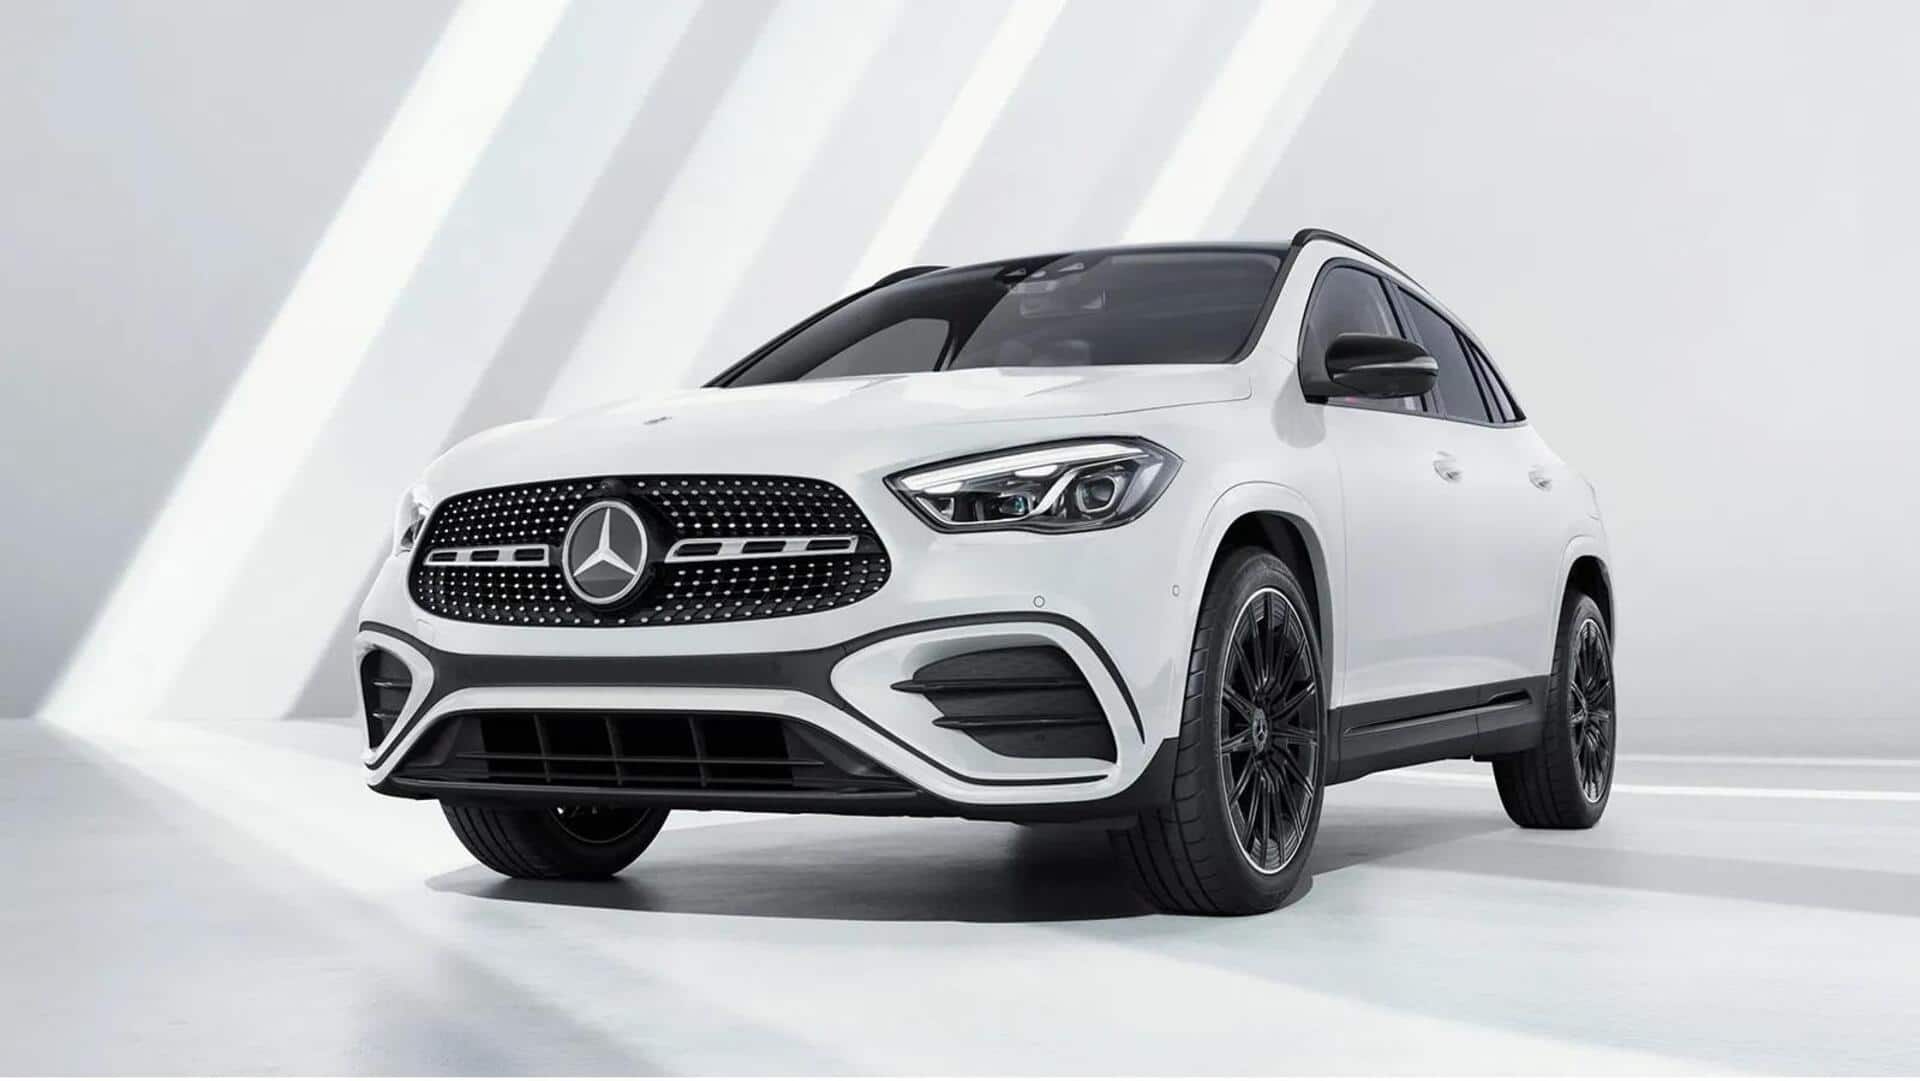 Mercedes-Benz GLA, AMG GLE 53 to launch on January 31